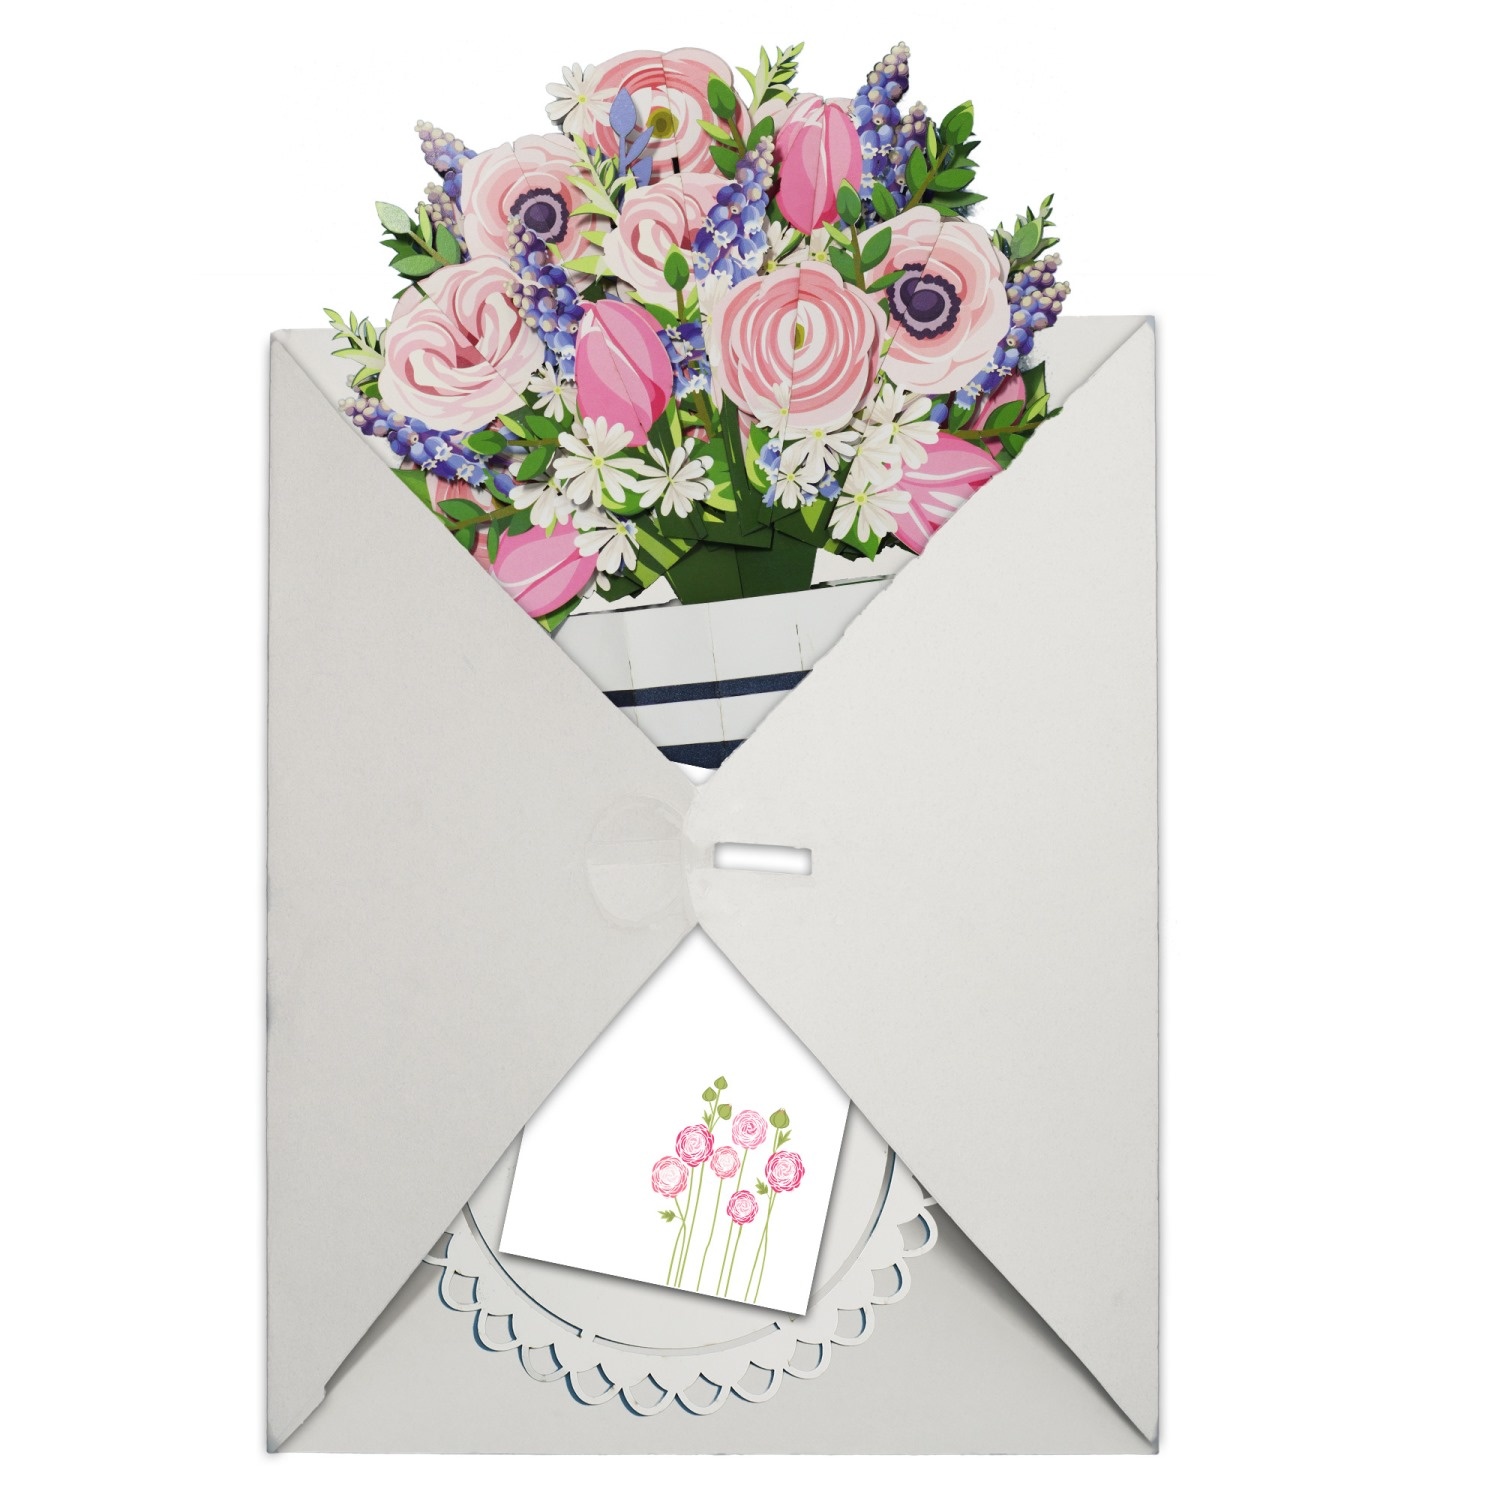 LINPOPUP pop-up bouquet, handmade paper flowers incl. vase and saucer, as a gift for birthday, Mother's Day, anniversary, get well soon, thank you, paper bouquet, ranunculus, LIN17903, LINPopUp®, N801